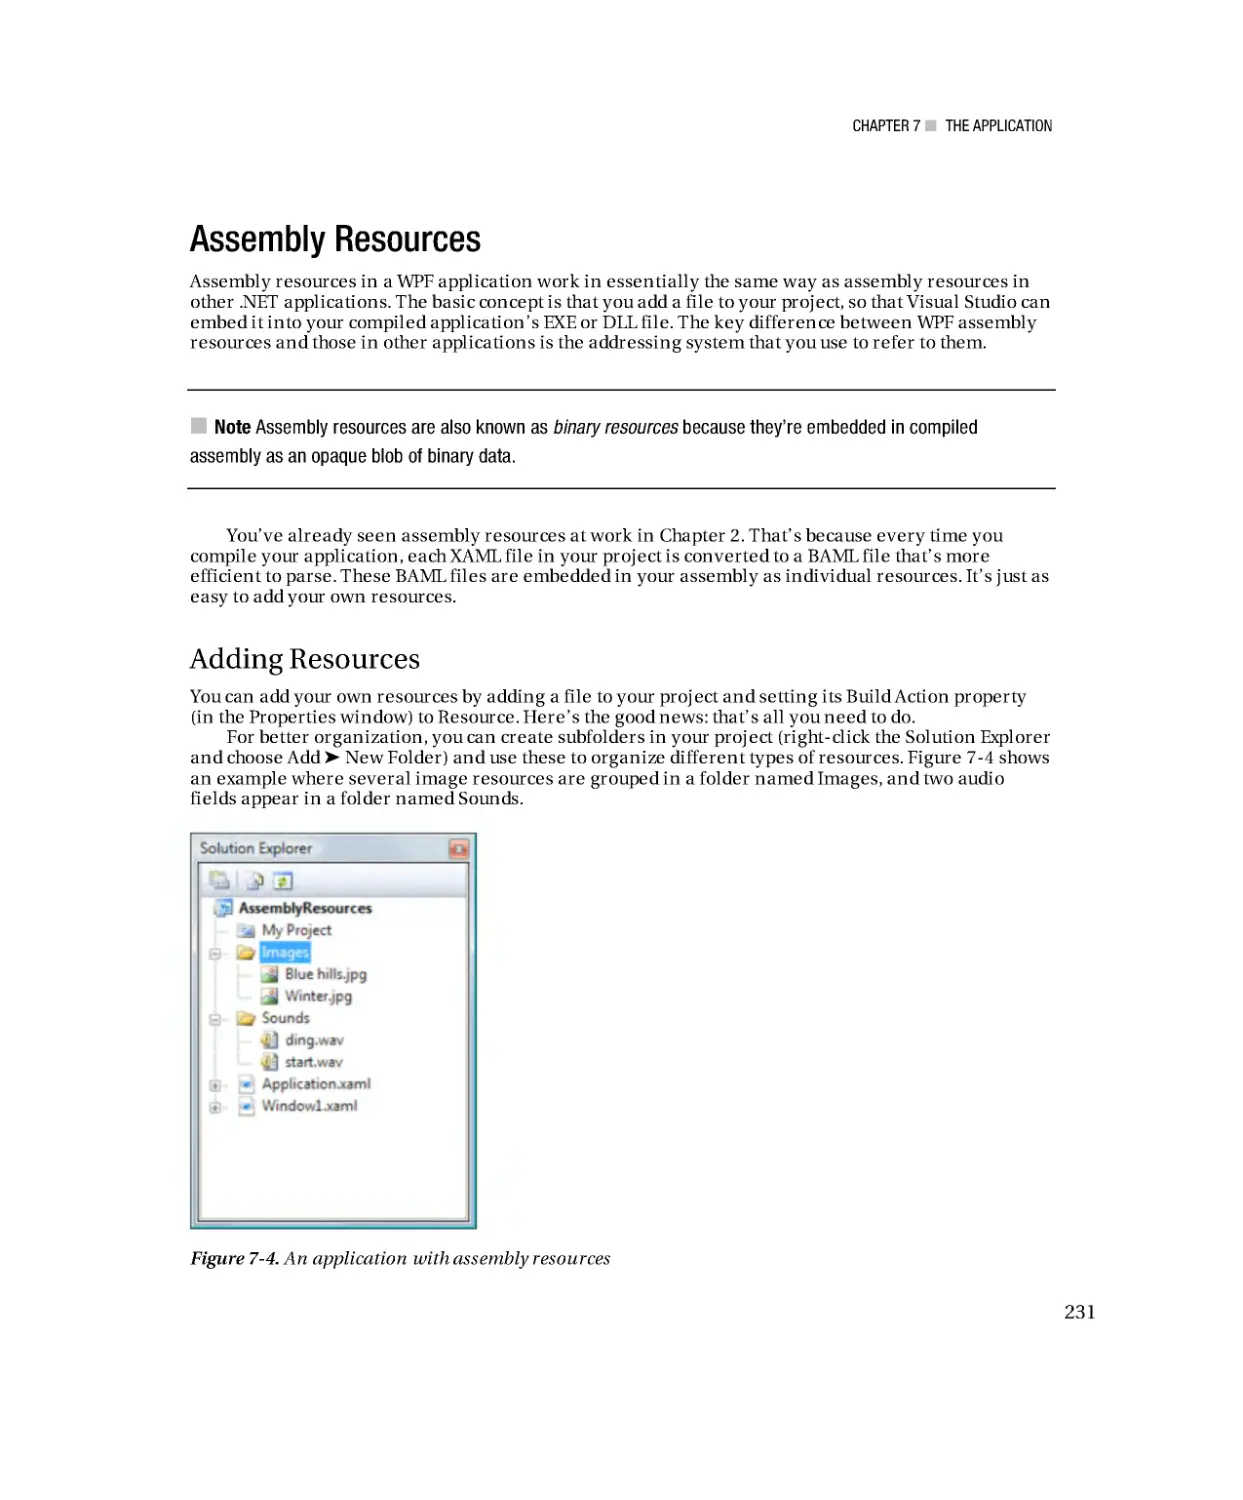 Assembly Resources